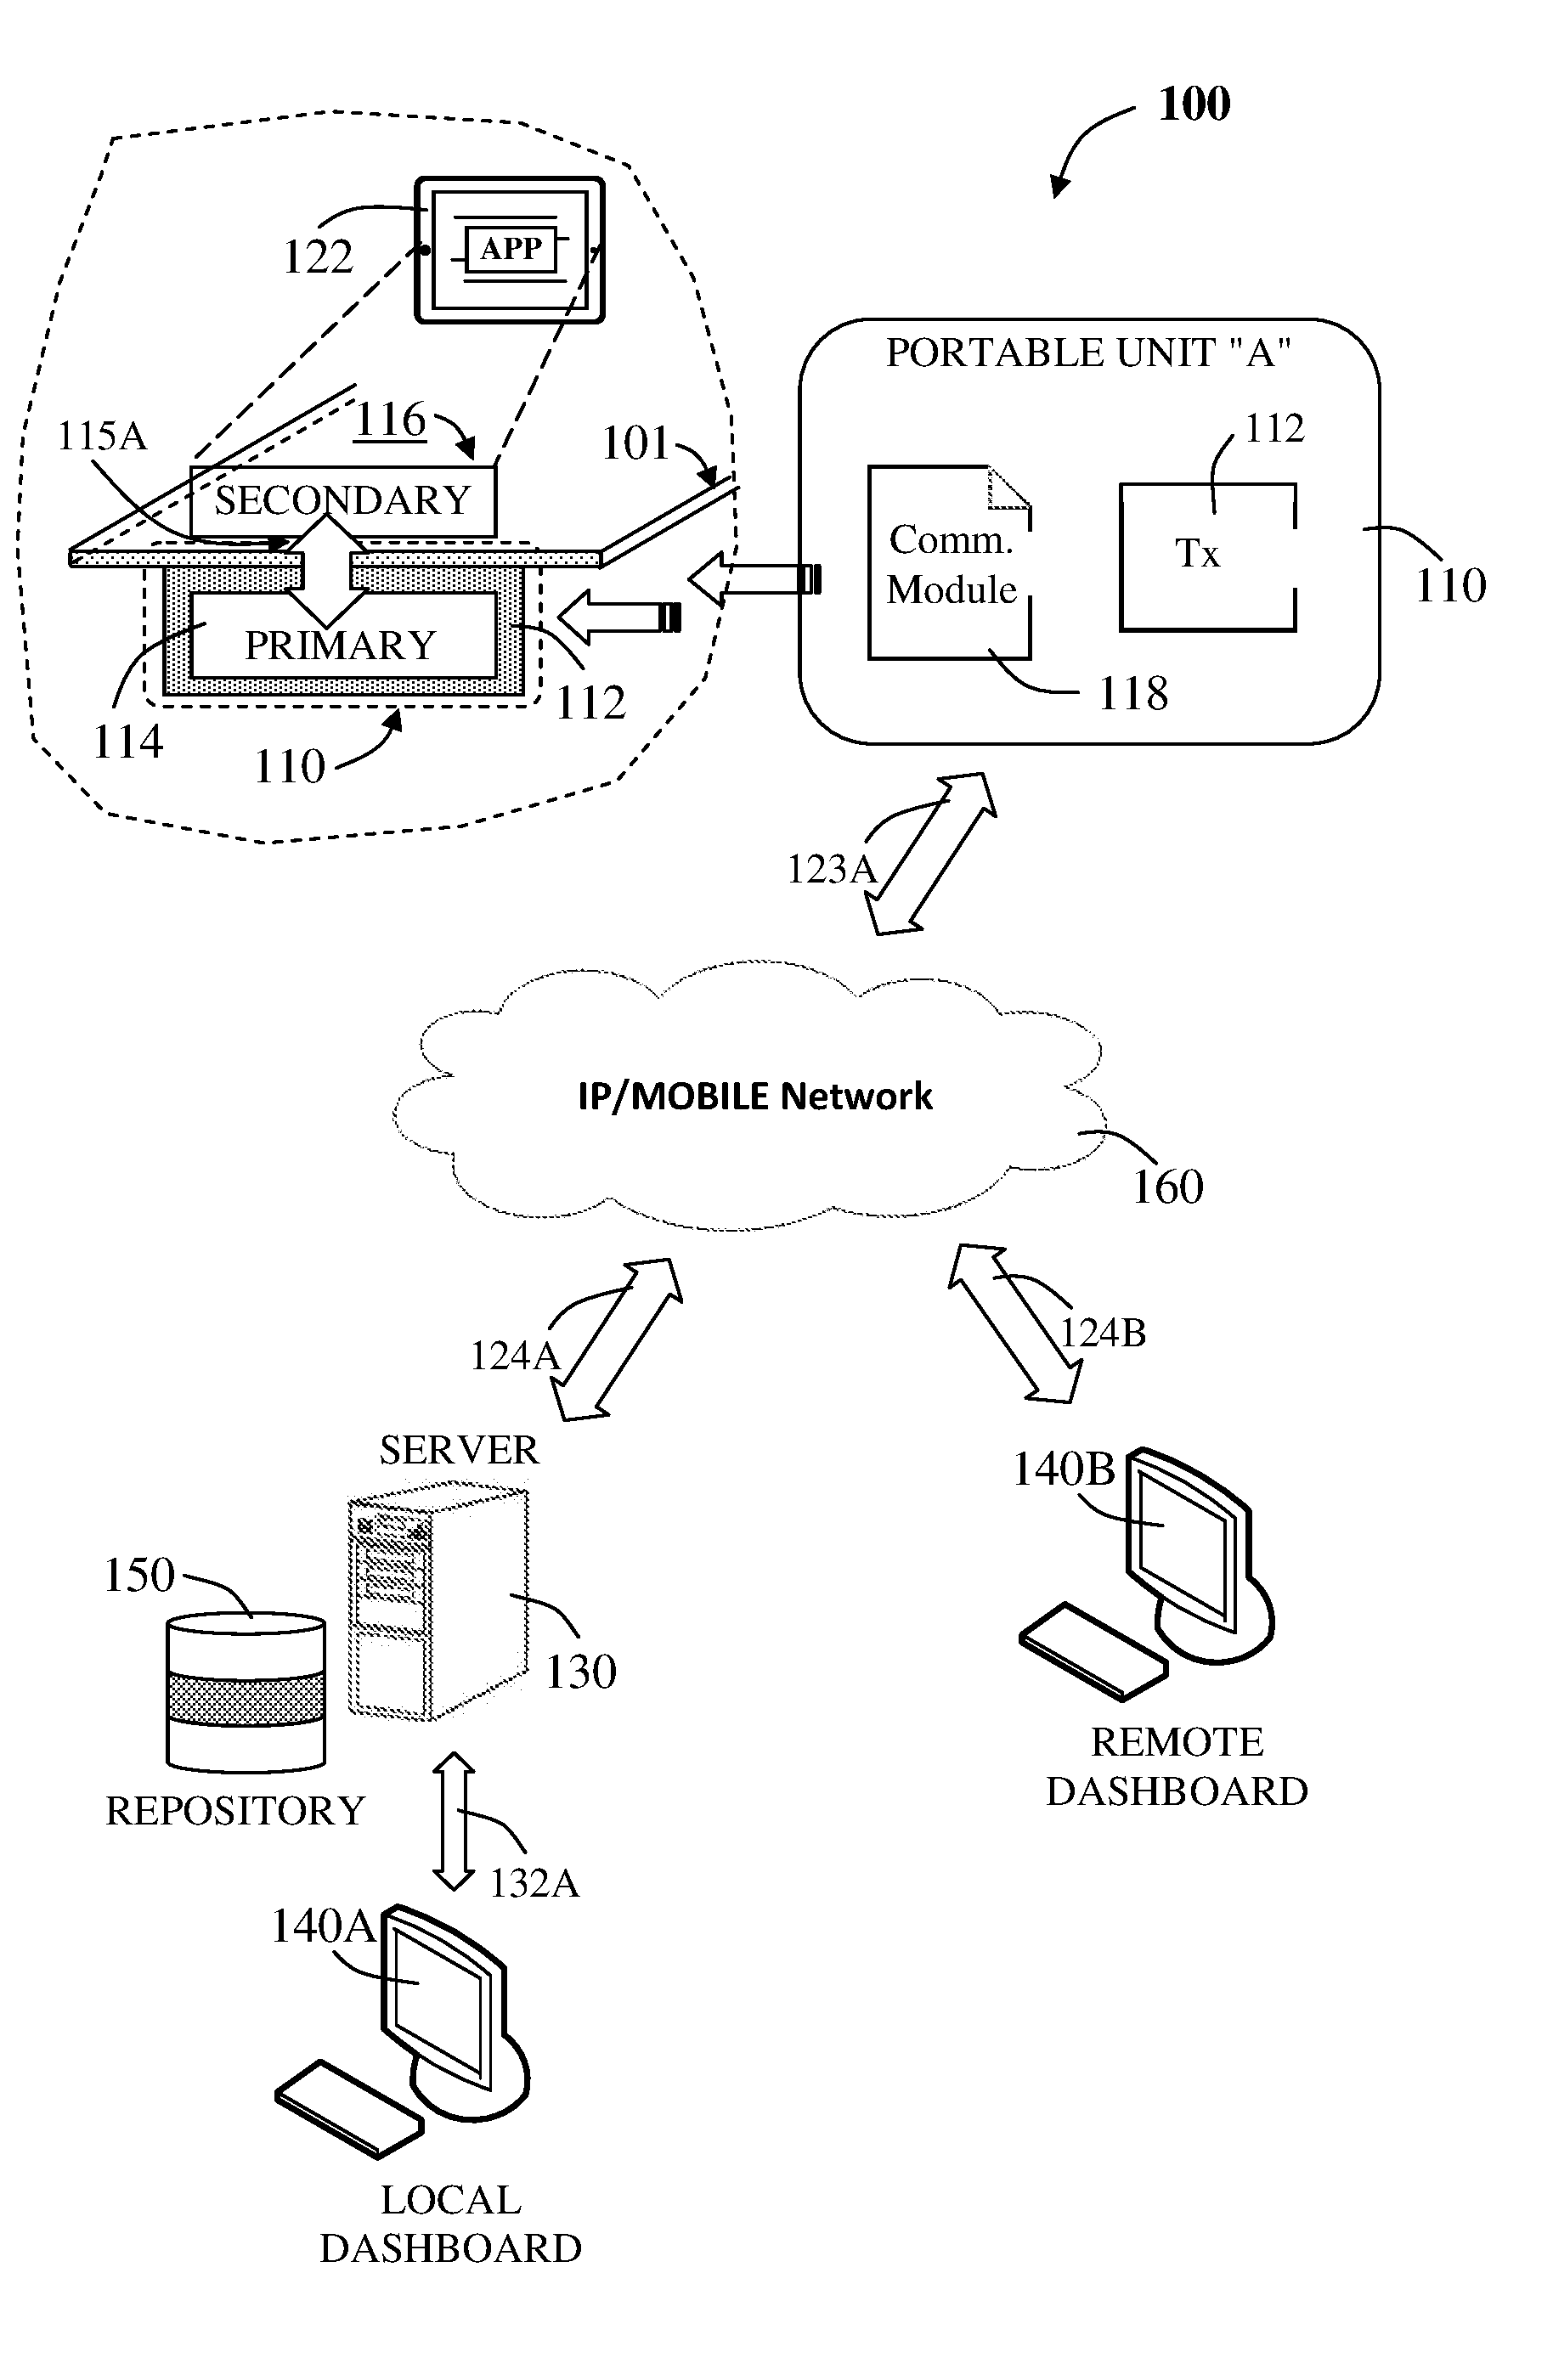 System and methods of centrally managing a wireless power outlet for powering electrical devices